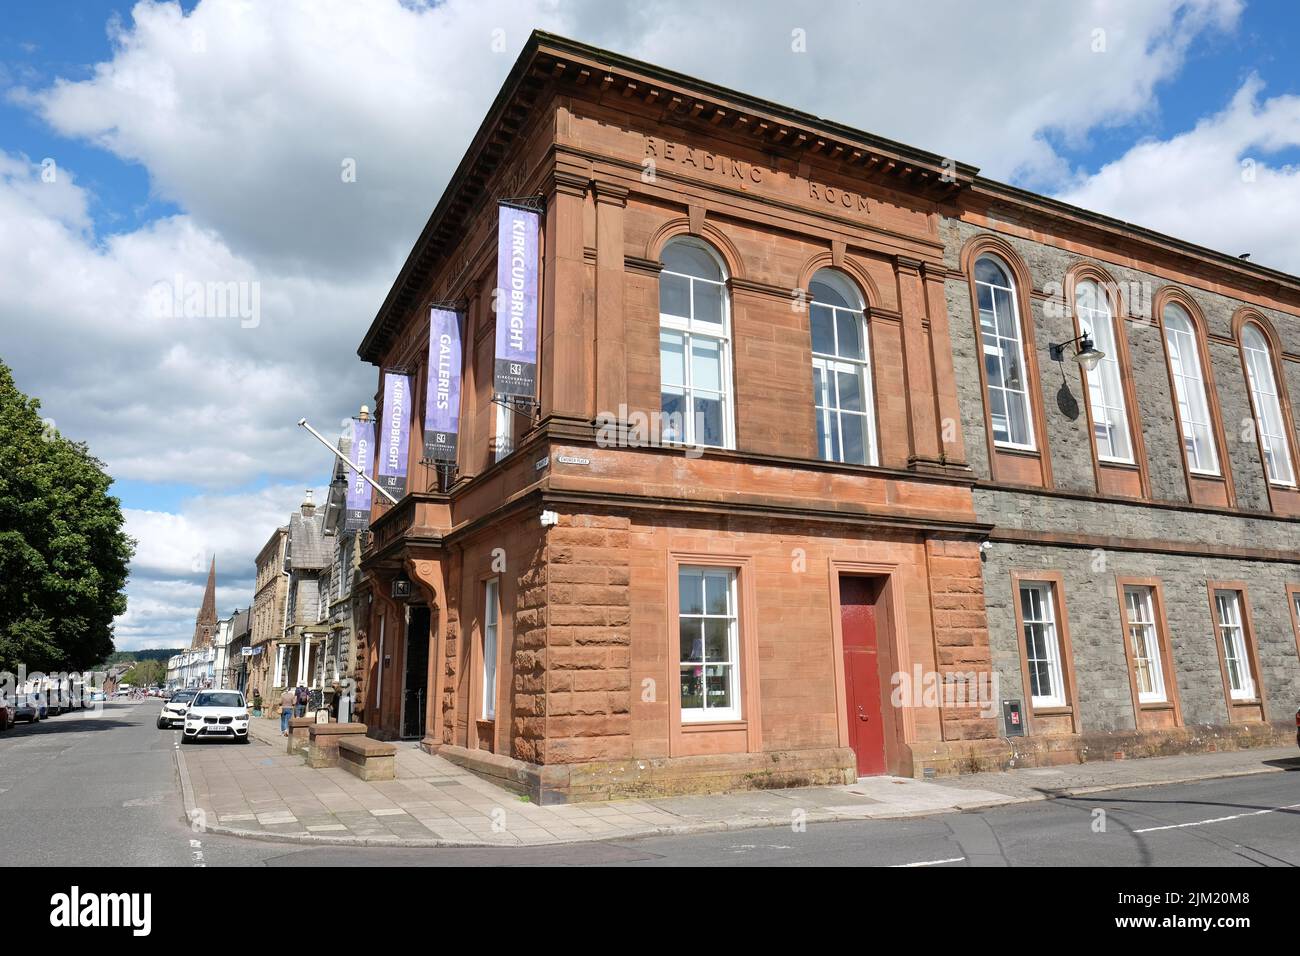 Kirkcudbright Scotland - The Kirkcudbright Galleries houses art and culture exhibitions photo July 2022 Stock Photo